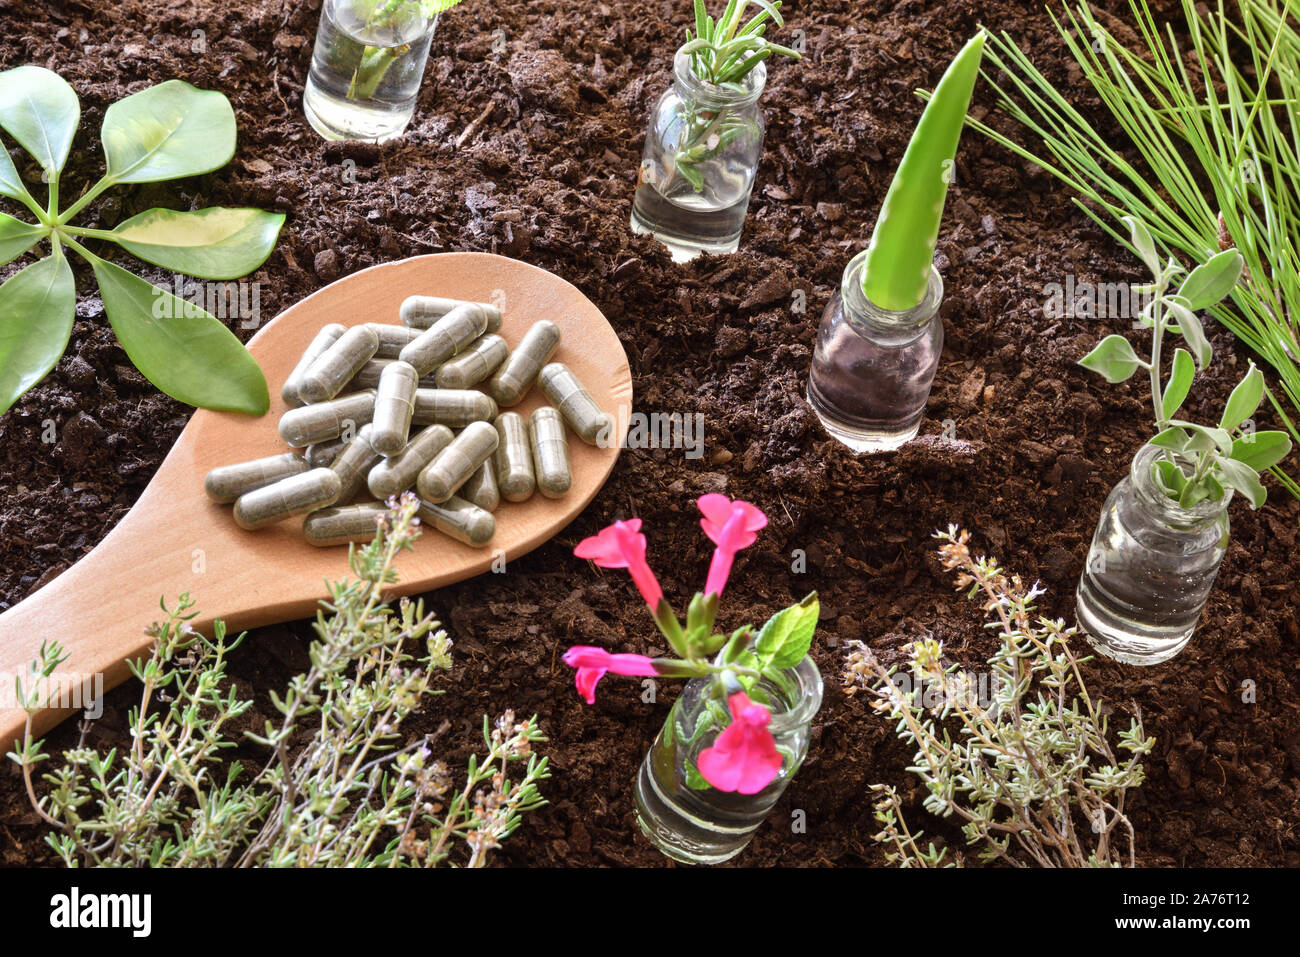 Jars with plants inside and spoon with capsules on soil. Alternative natural medicine concept. Elevated view. Horizontal composition. Stock Photo